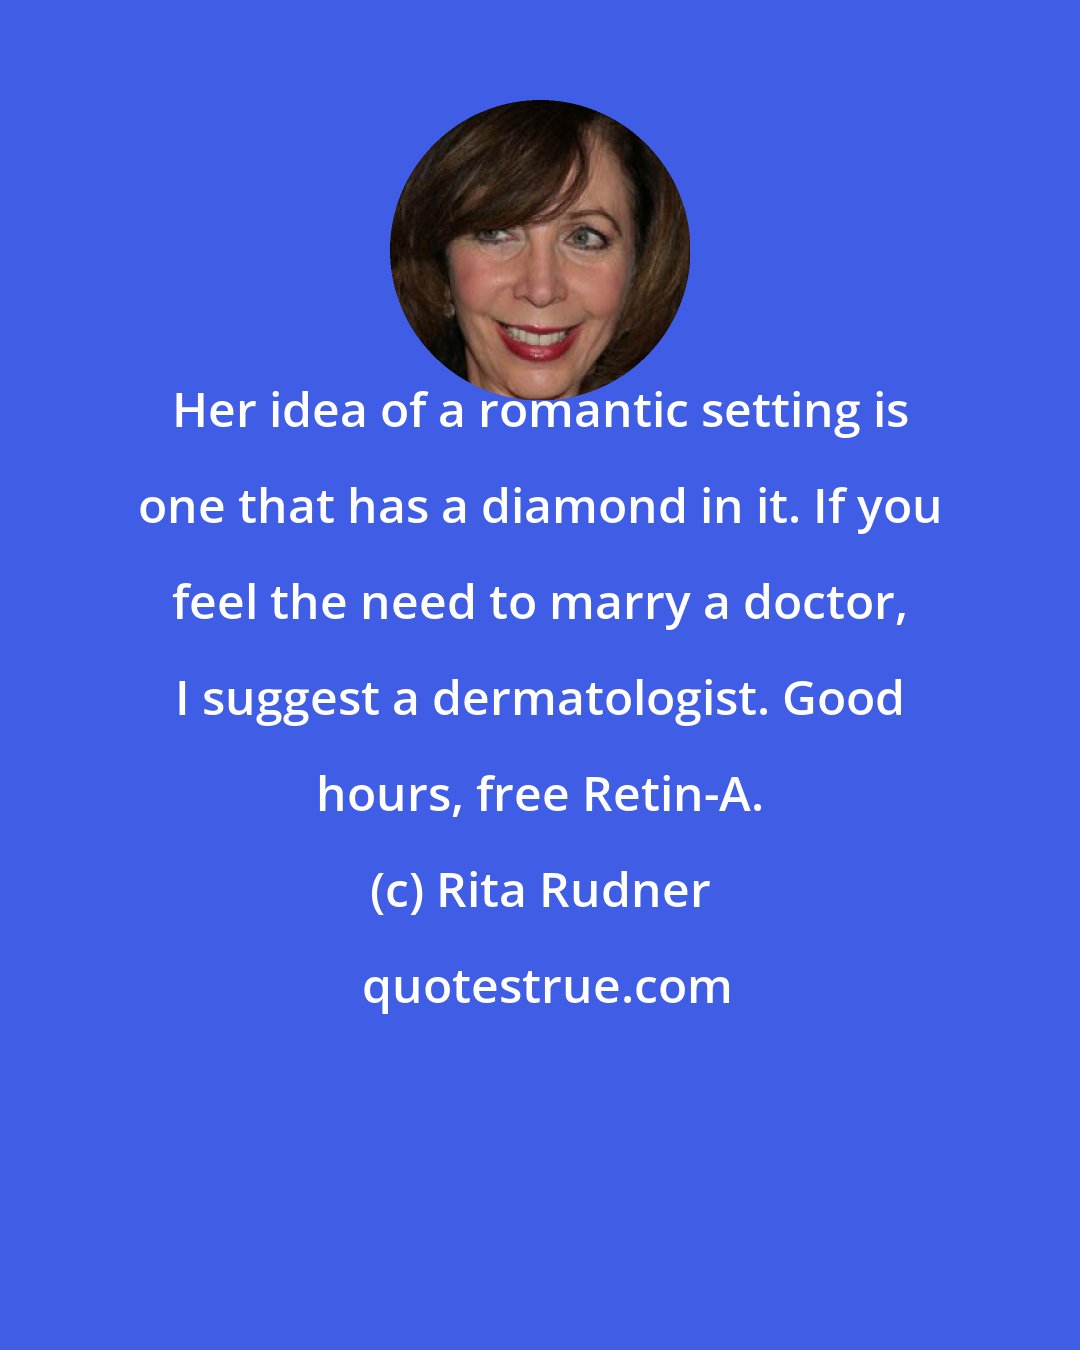 Rita Rudner: Her idea of a romantic setting is one that has a diamond in it. If you feel the need to marry a doctor, I suggest a dermatologist. Good hours, free Retin-A.